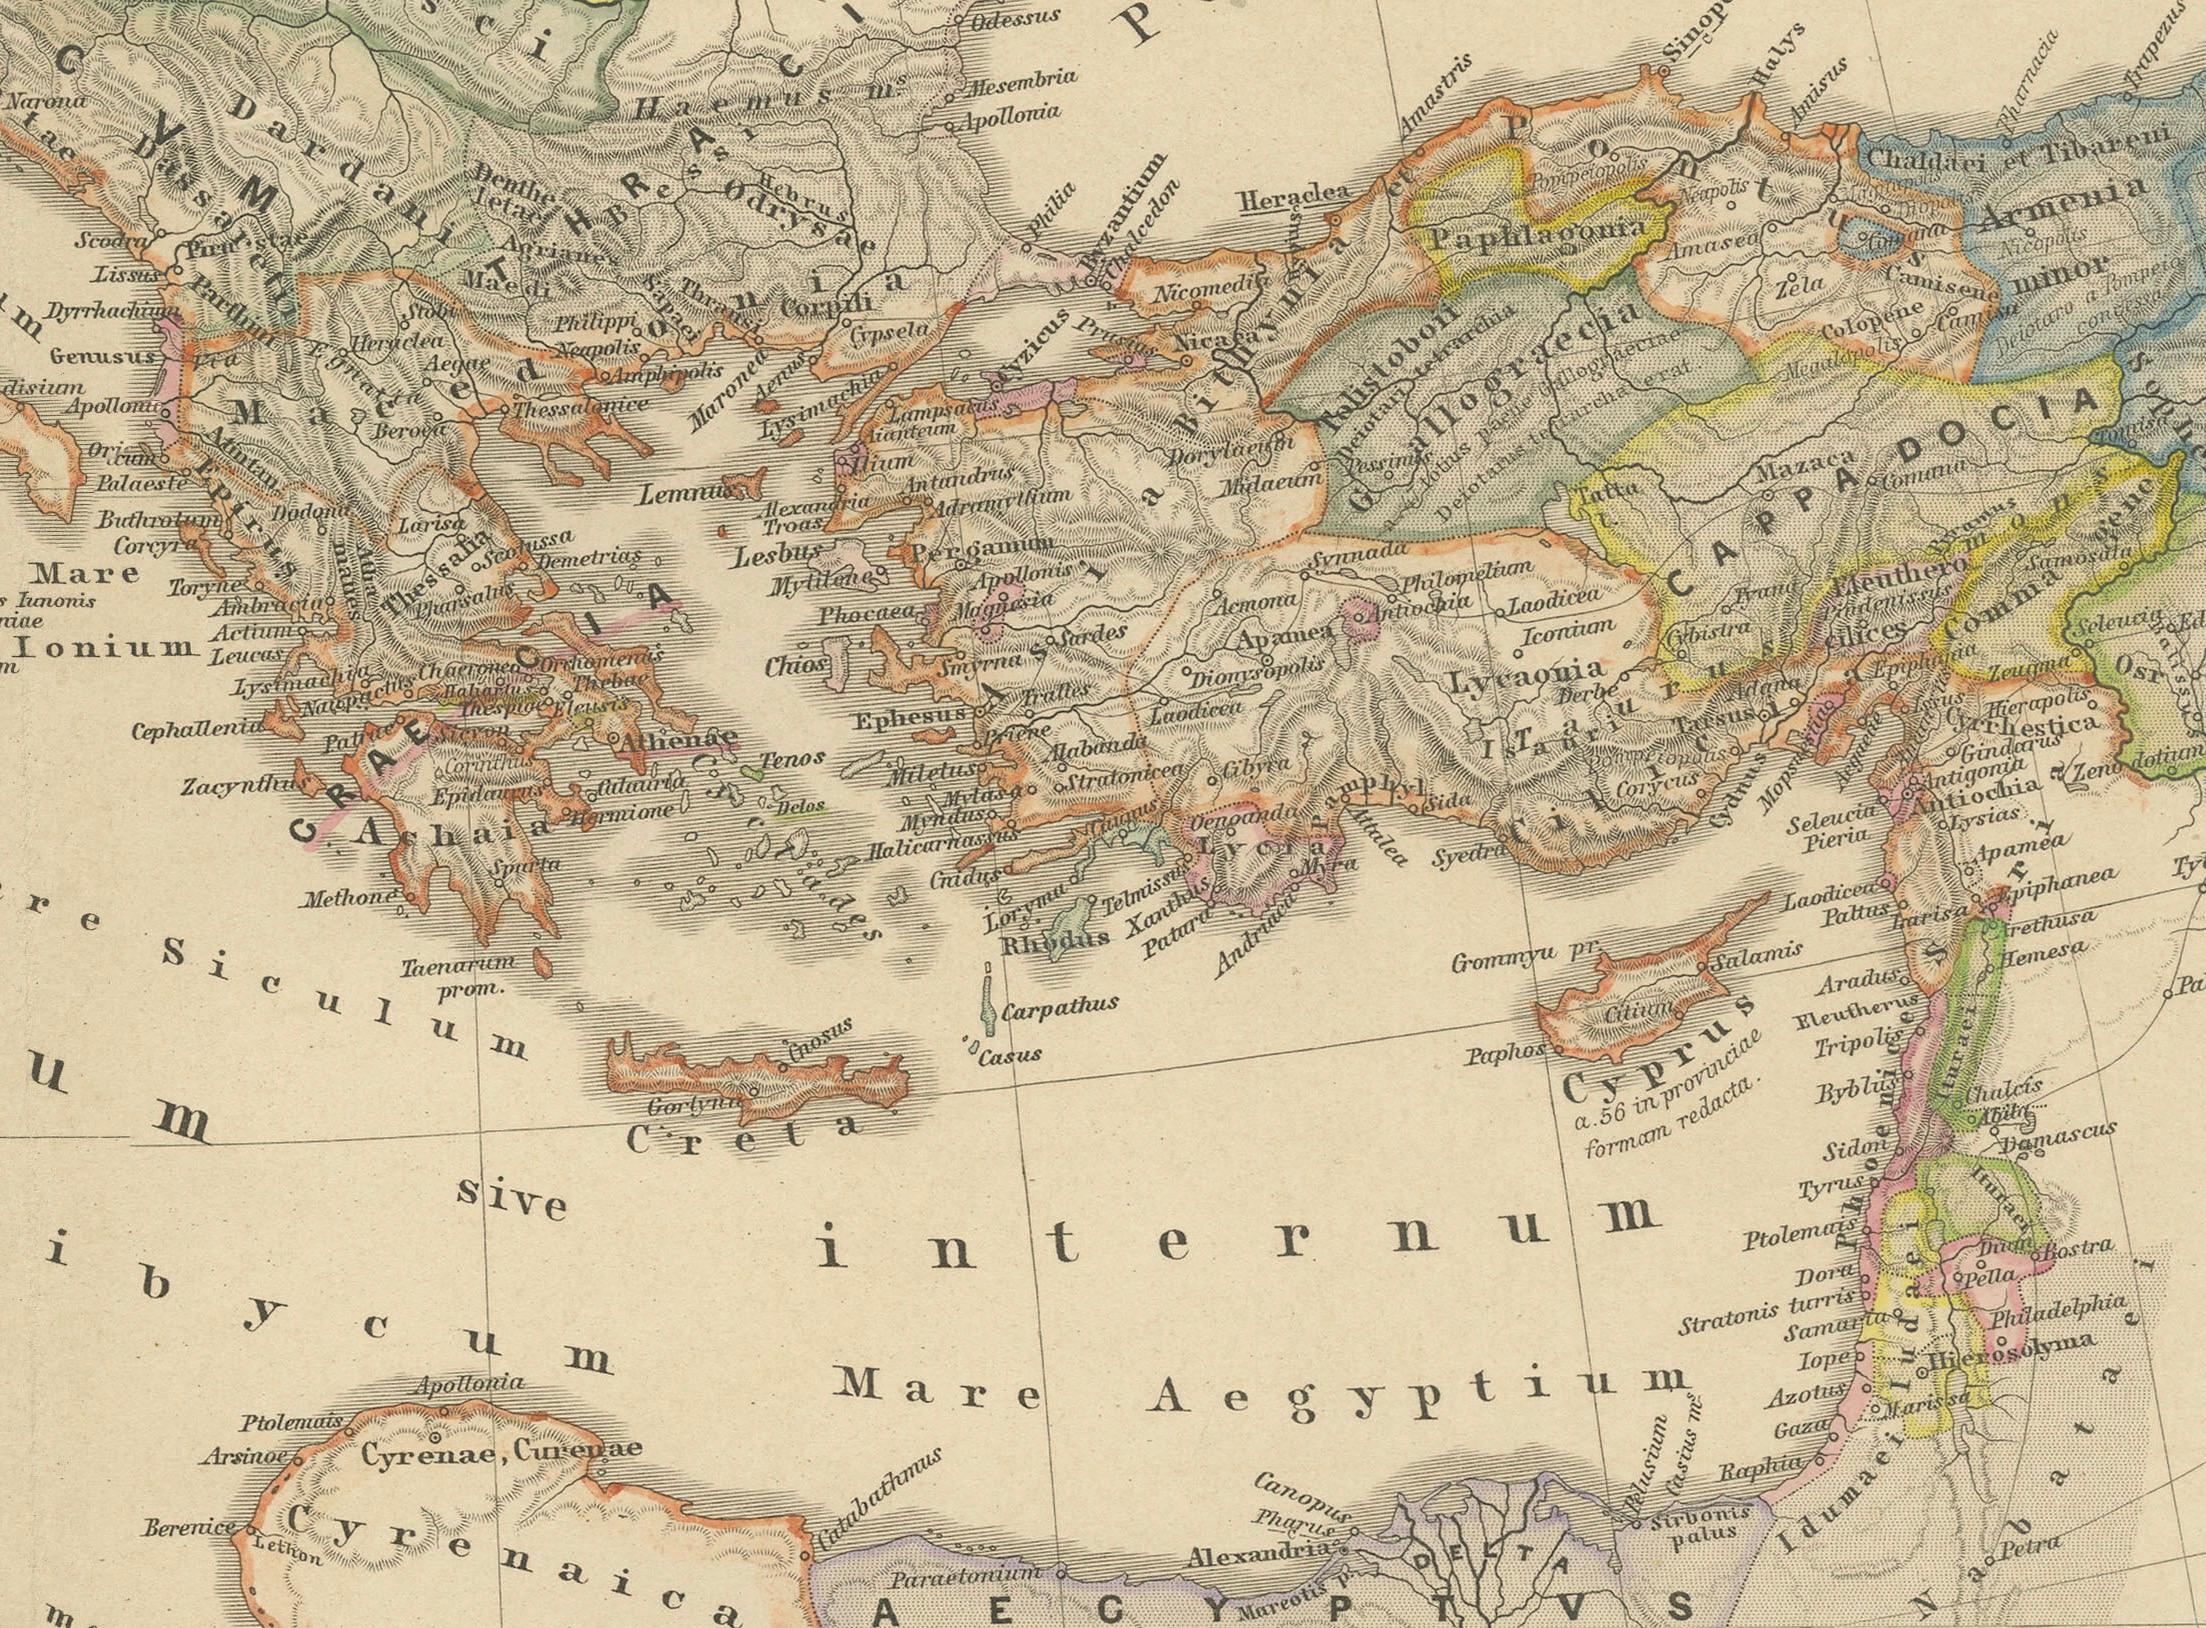 This is a historical map that depicts the Mediterranean region during a specific timeframe in Roman history, from the return of Pompey the Great after his campaign in Asia Minor to the Battle of Actium, which was a decisive confrontation that led to